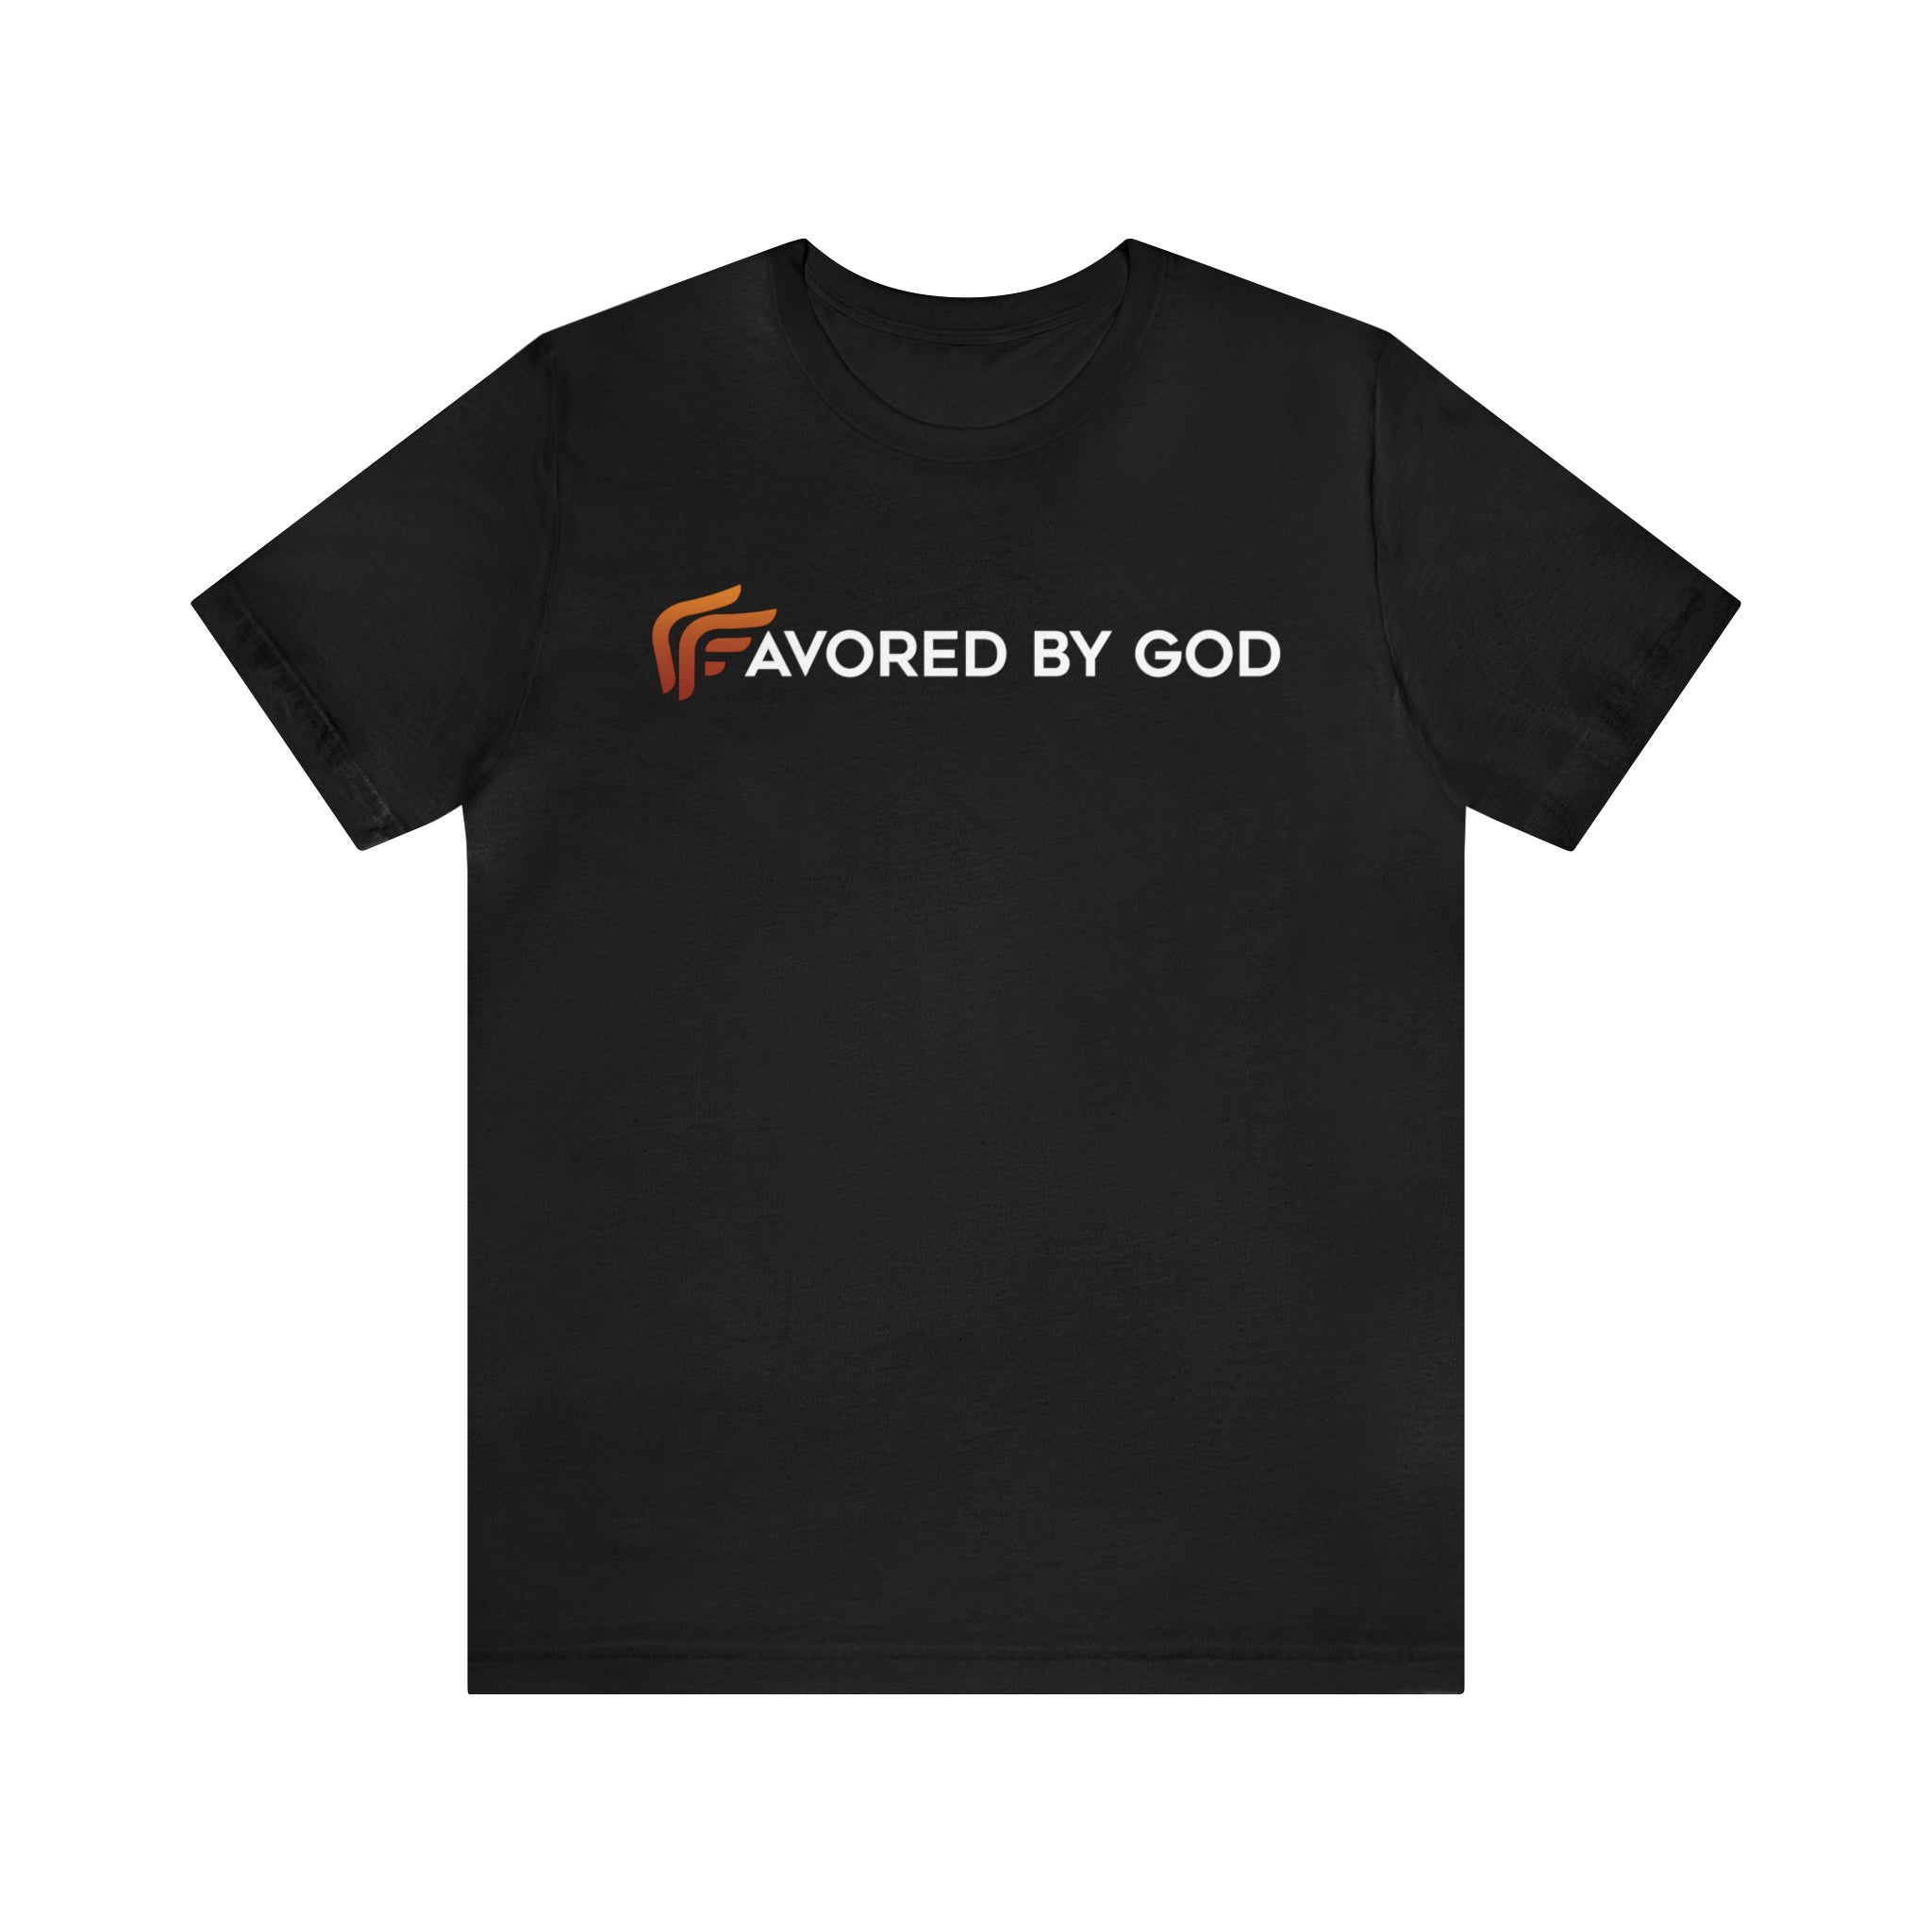 Signature Favored By God Tee